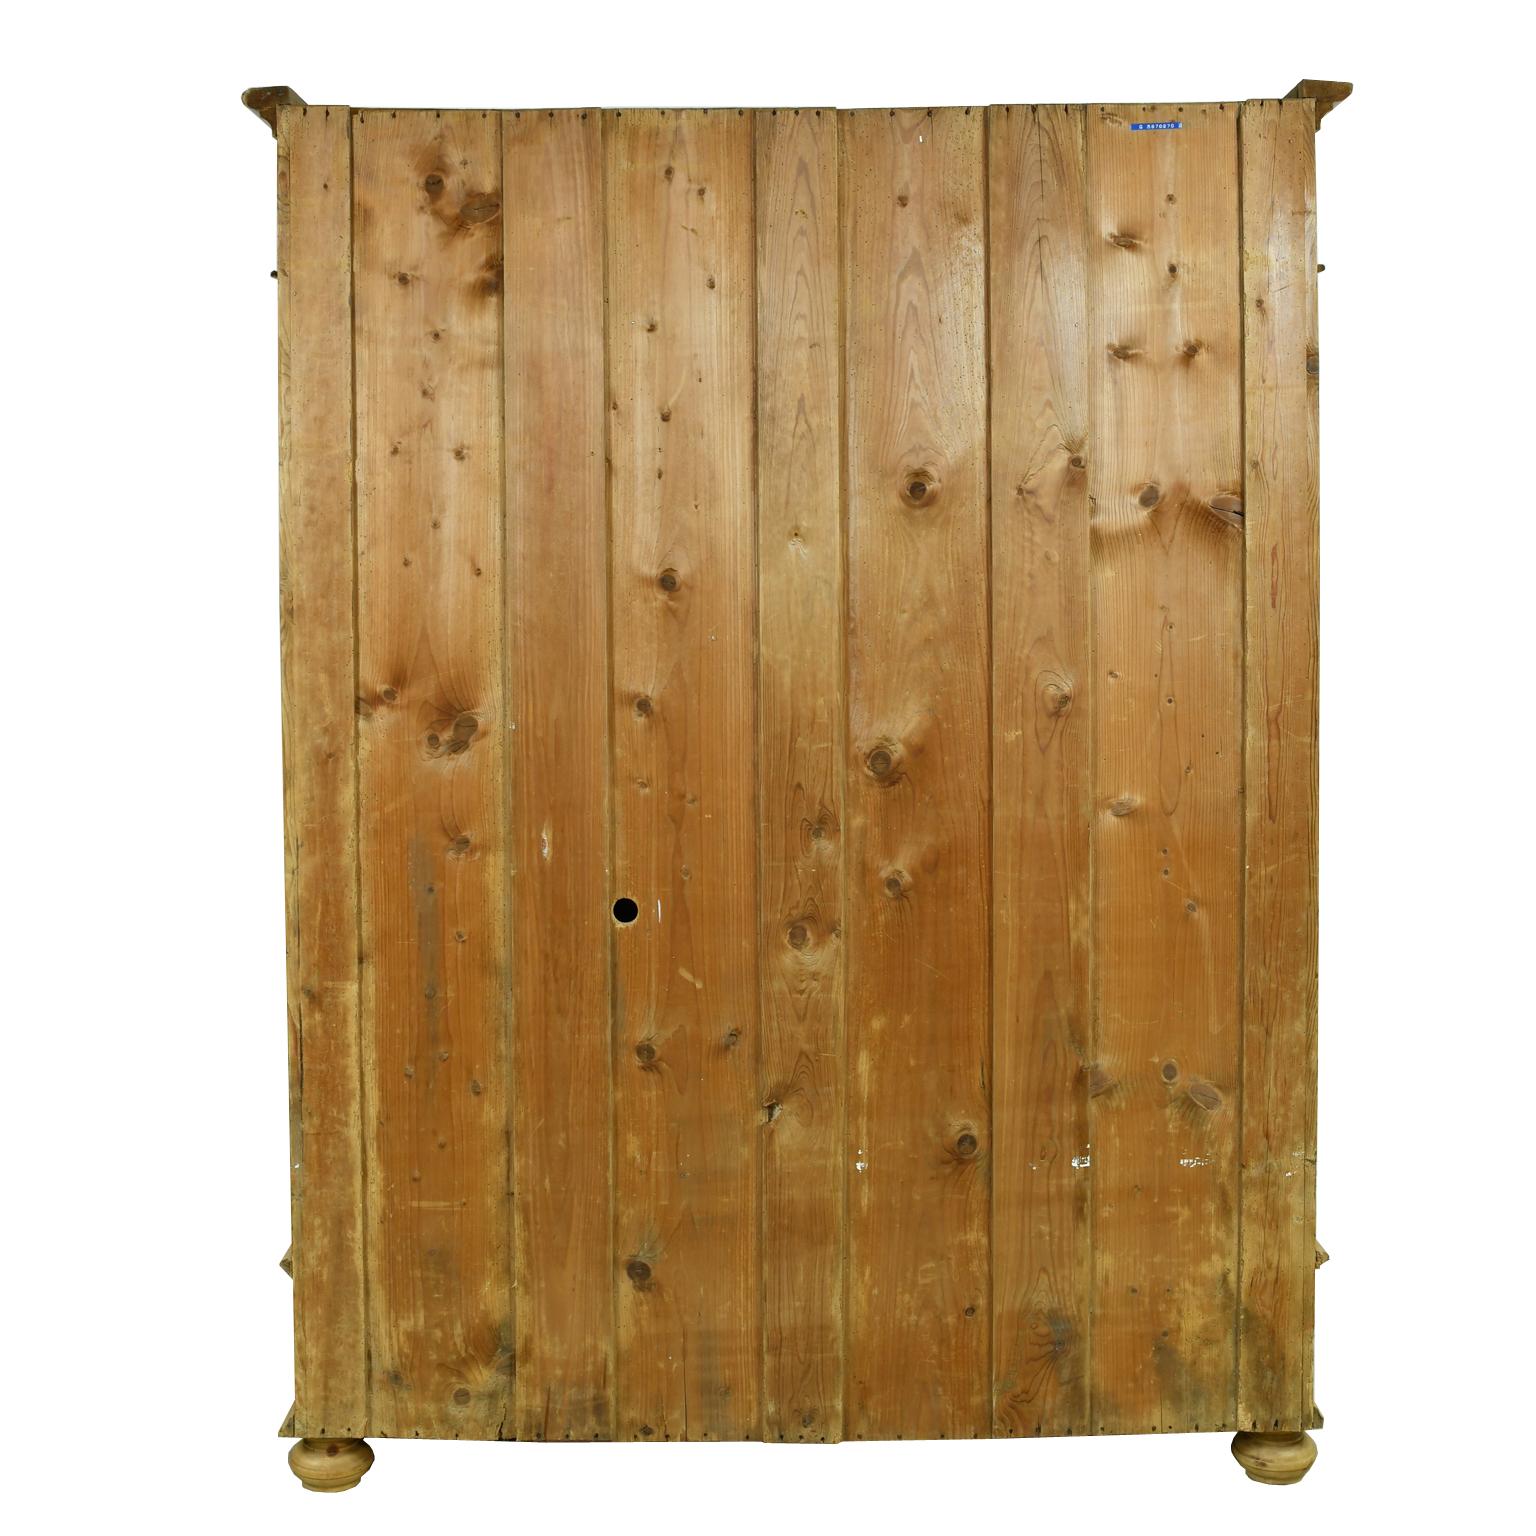 Hand-Crafted Large Armoire in Pine with Interior Storage Shelves, Northern Germany